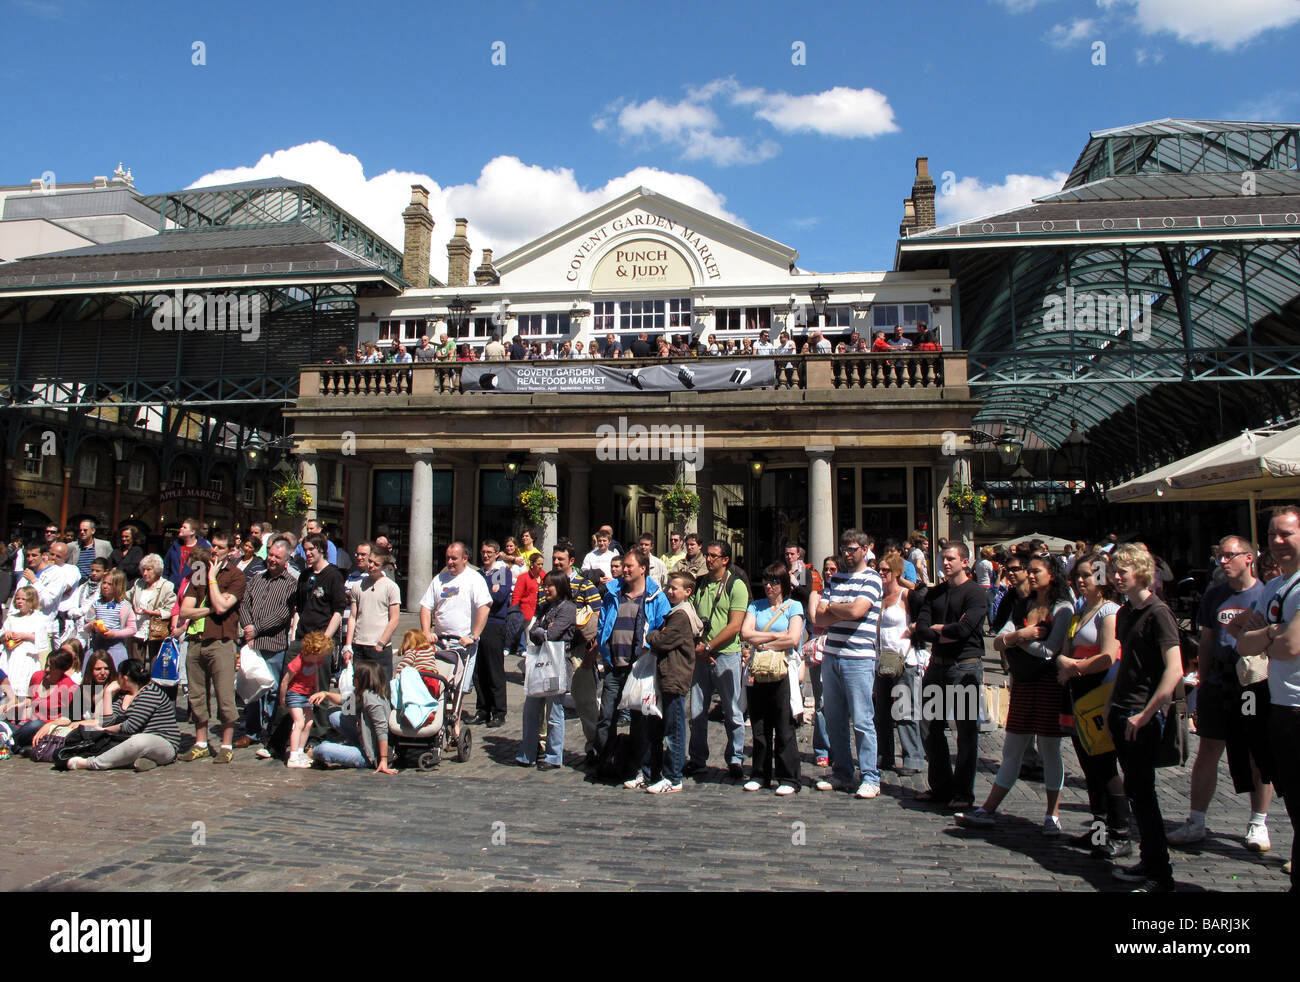 Crowds of tourists watching street artists busking in the sunshine outside Punch and Judy pub at Covent Garden Market in London. Stock Photo